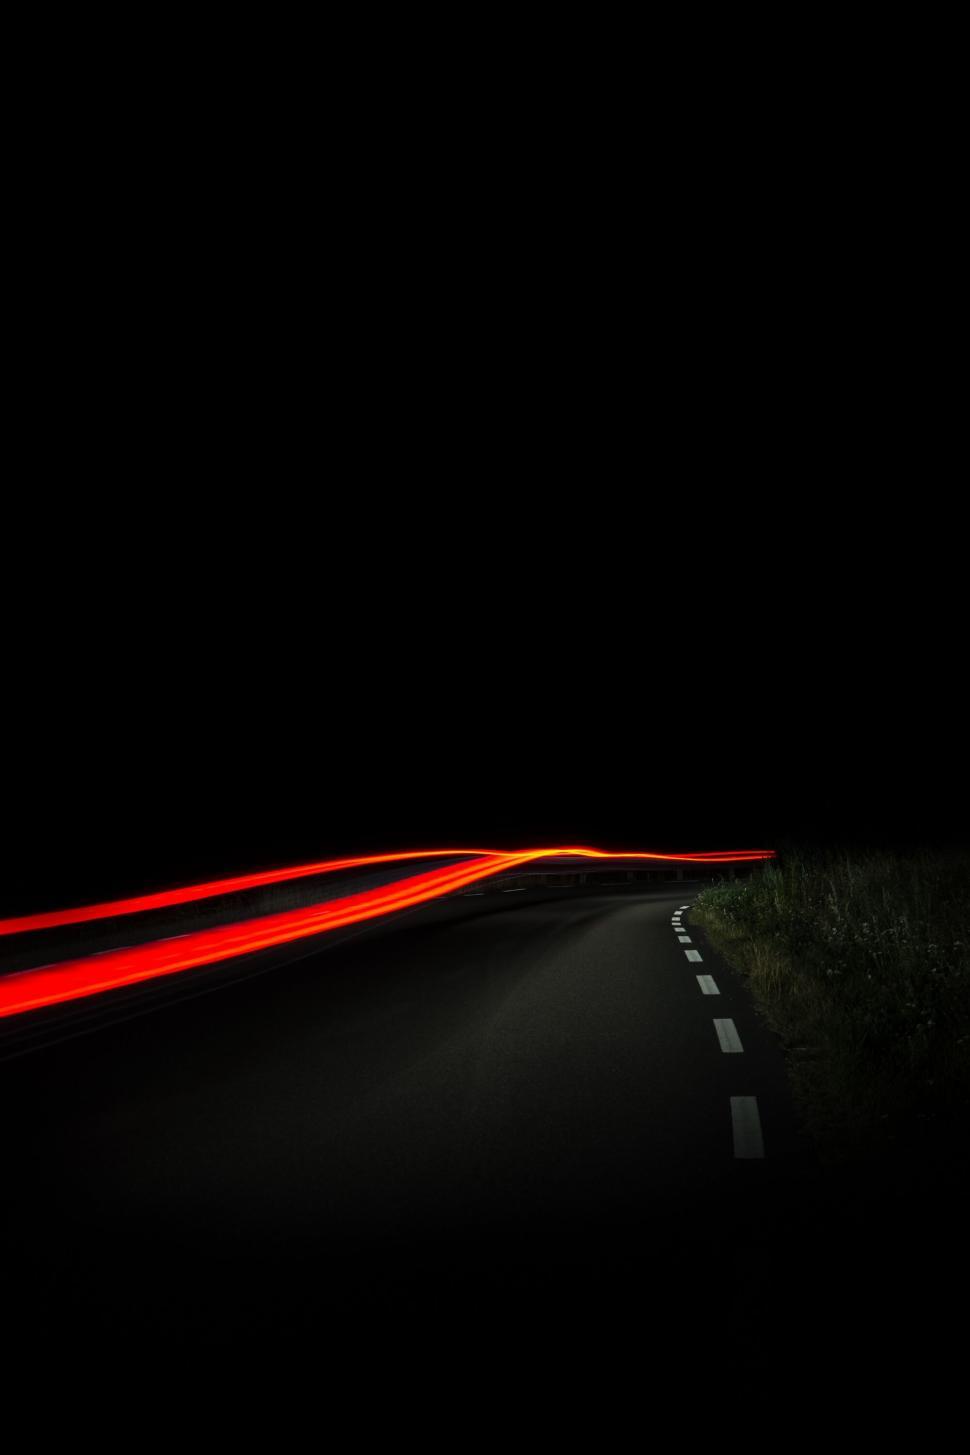 Free Image of Long exposure of car lights on a road 